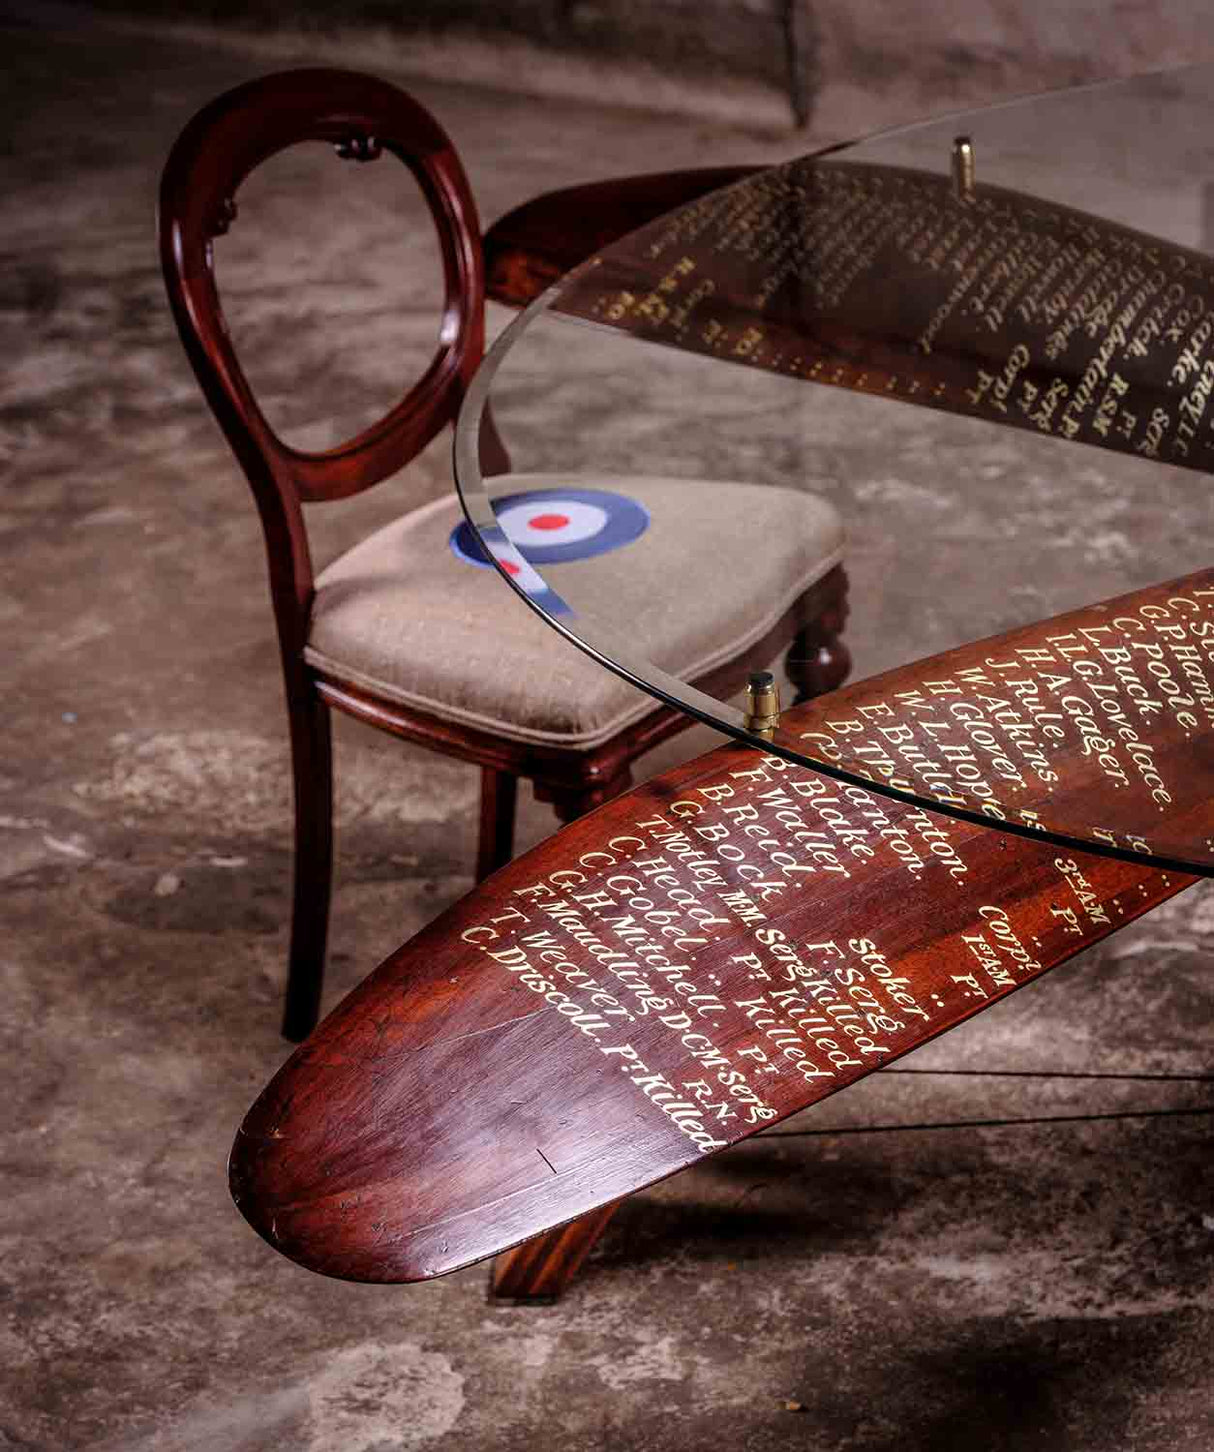 BLADES OF GLORY Propeller RAF Dining Table and Chairs